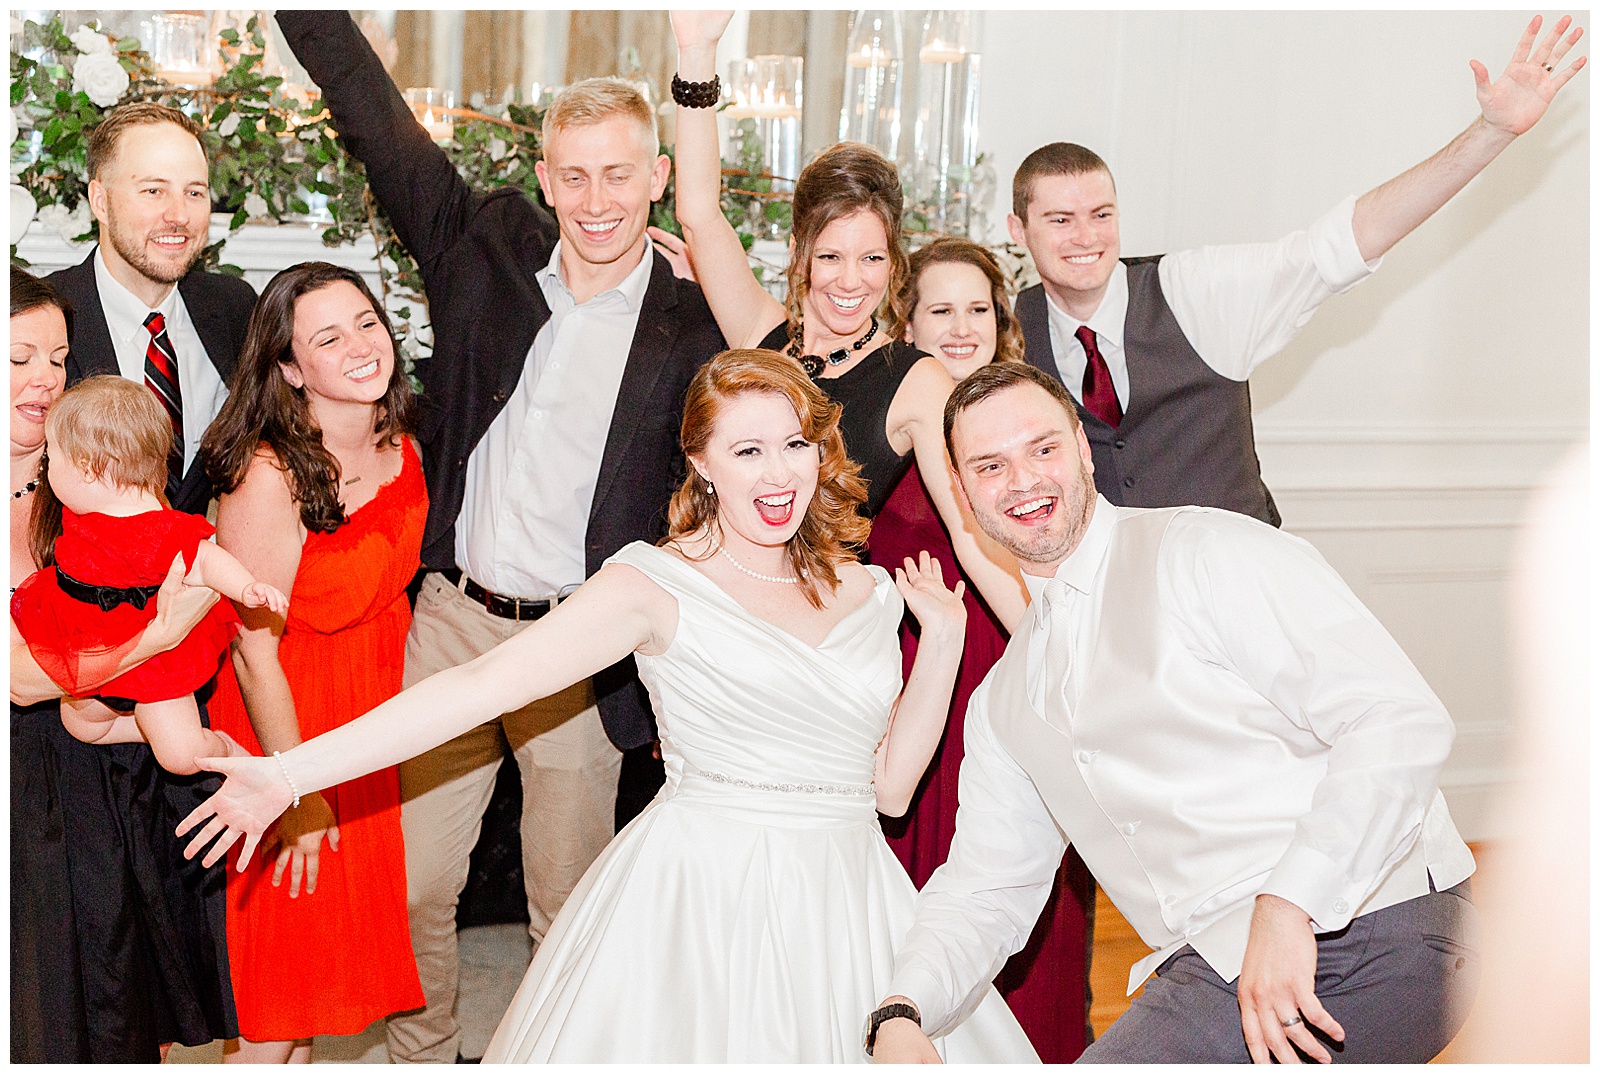 Goofy Group Photo with gorgeous red-haired bride at elegant indoor floral venue in 1940s Modern Vintage Wedding in Charlotte, NC | check out the full wedding at KevynDixonPhoto.com